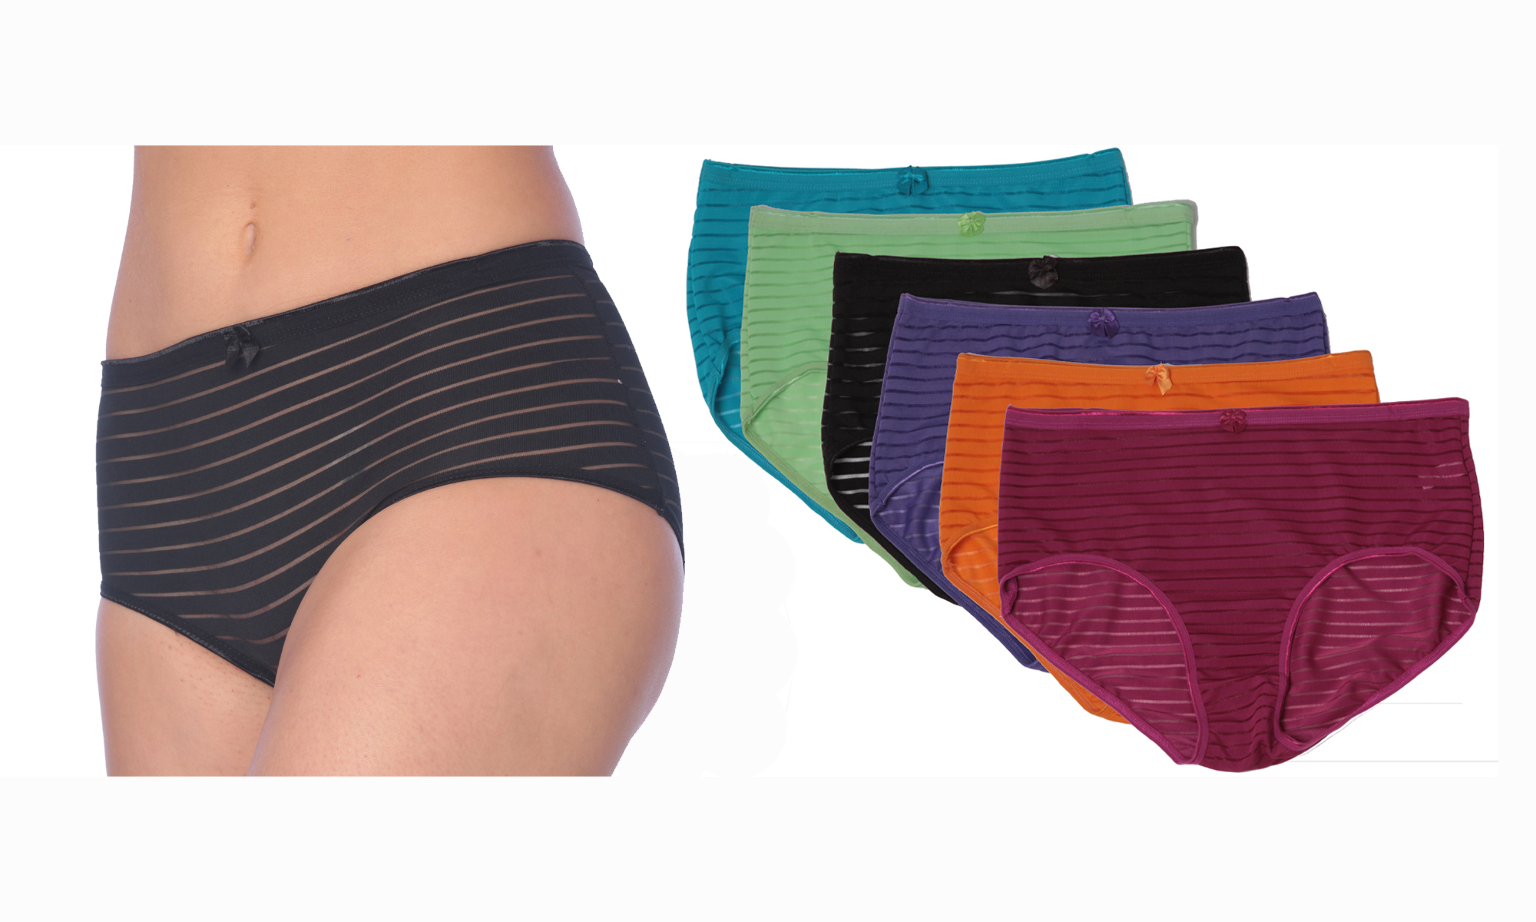 Wholesale Women's Mid-Rise Panties - Assorted, Sizes 5-7